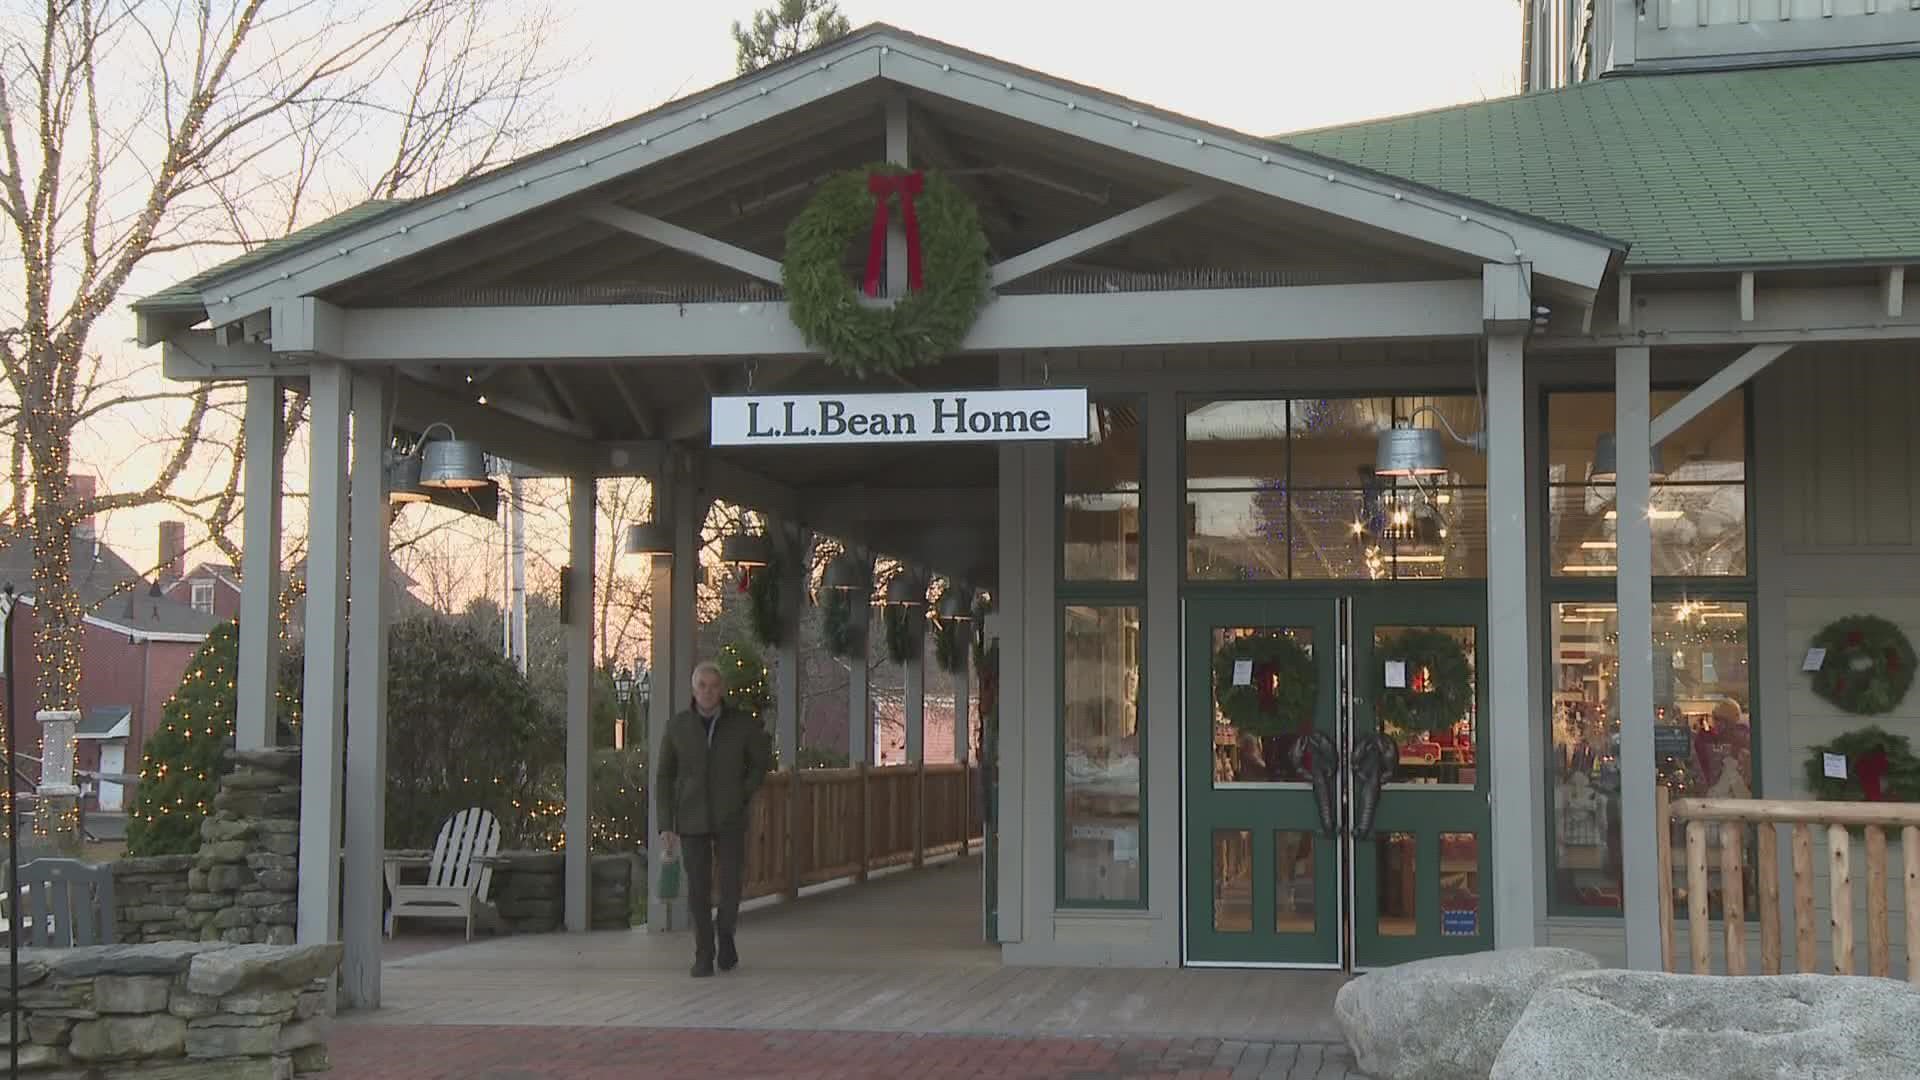 A "blue law" requires some large stores to close on Christmas, Easter, and Thanksgiving in Maine, but not L.L.Bean.